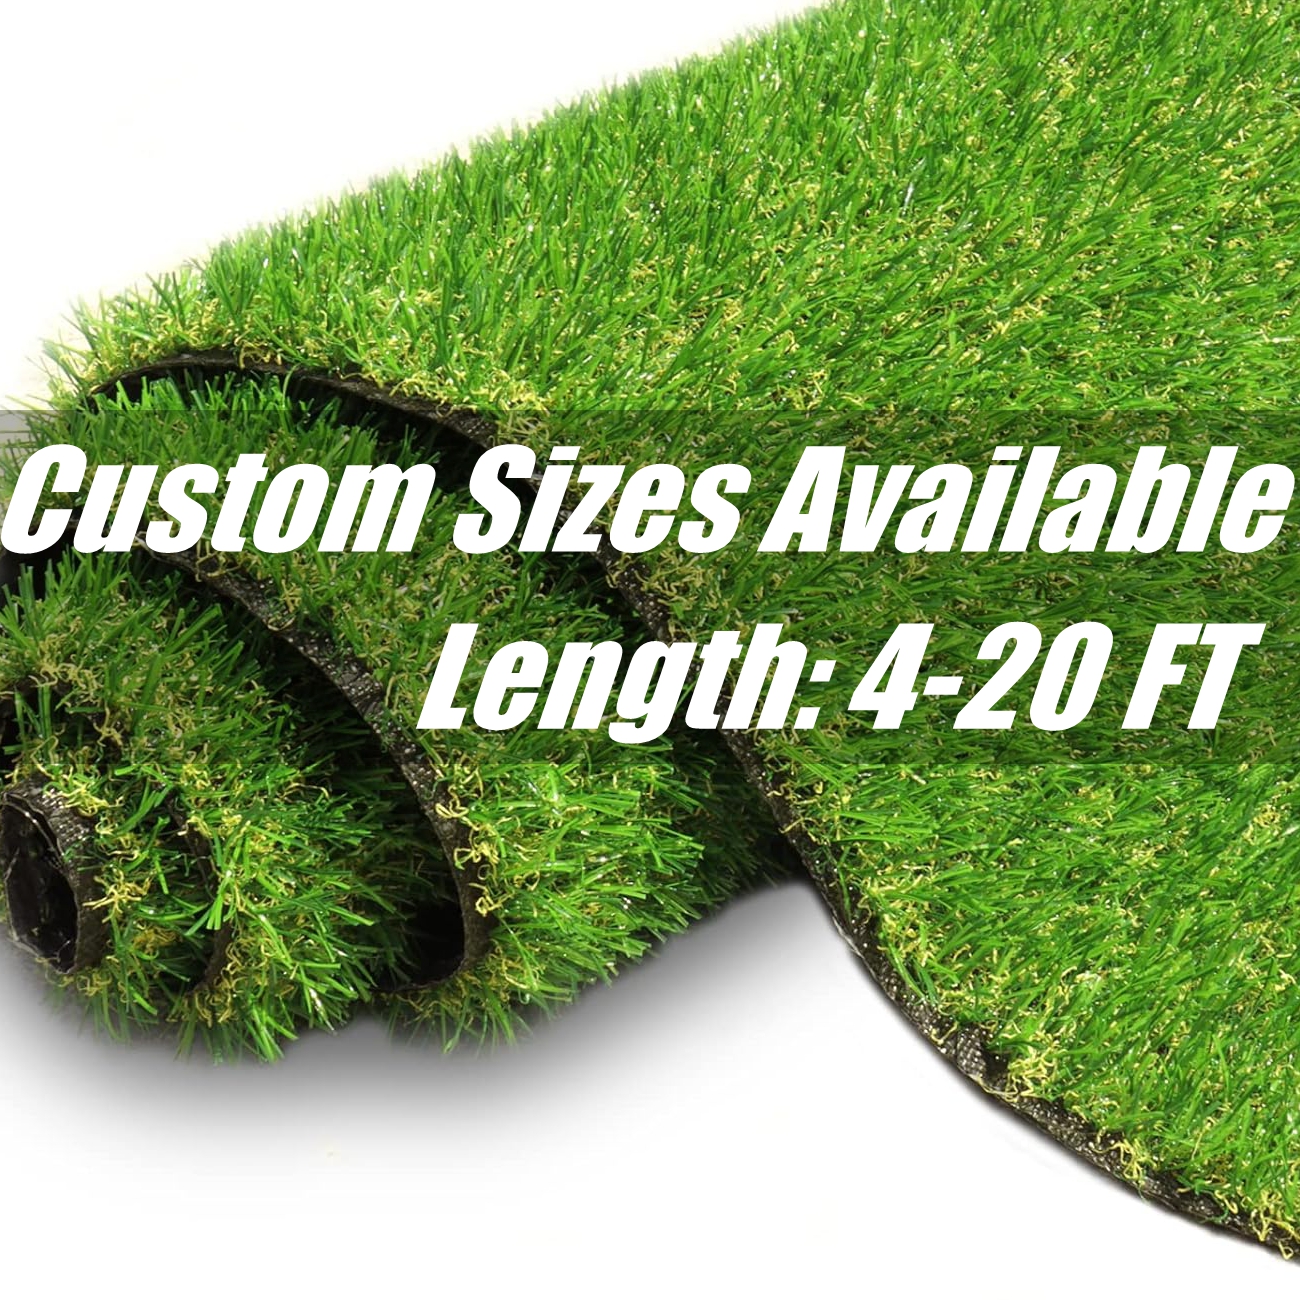 

Custom Sizes Grass With Drainage, 0.8 Inch Realistic Fake Grass Rug Indoor Outdoor Lawn Landscape For Garden, Balcony, Backyard, Patio, Synthetic Grass Mat For Pet Dogs